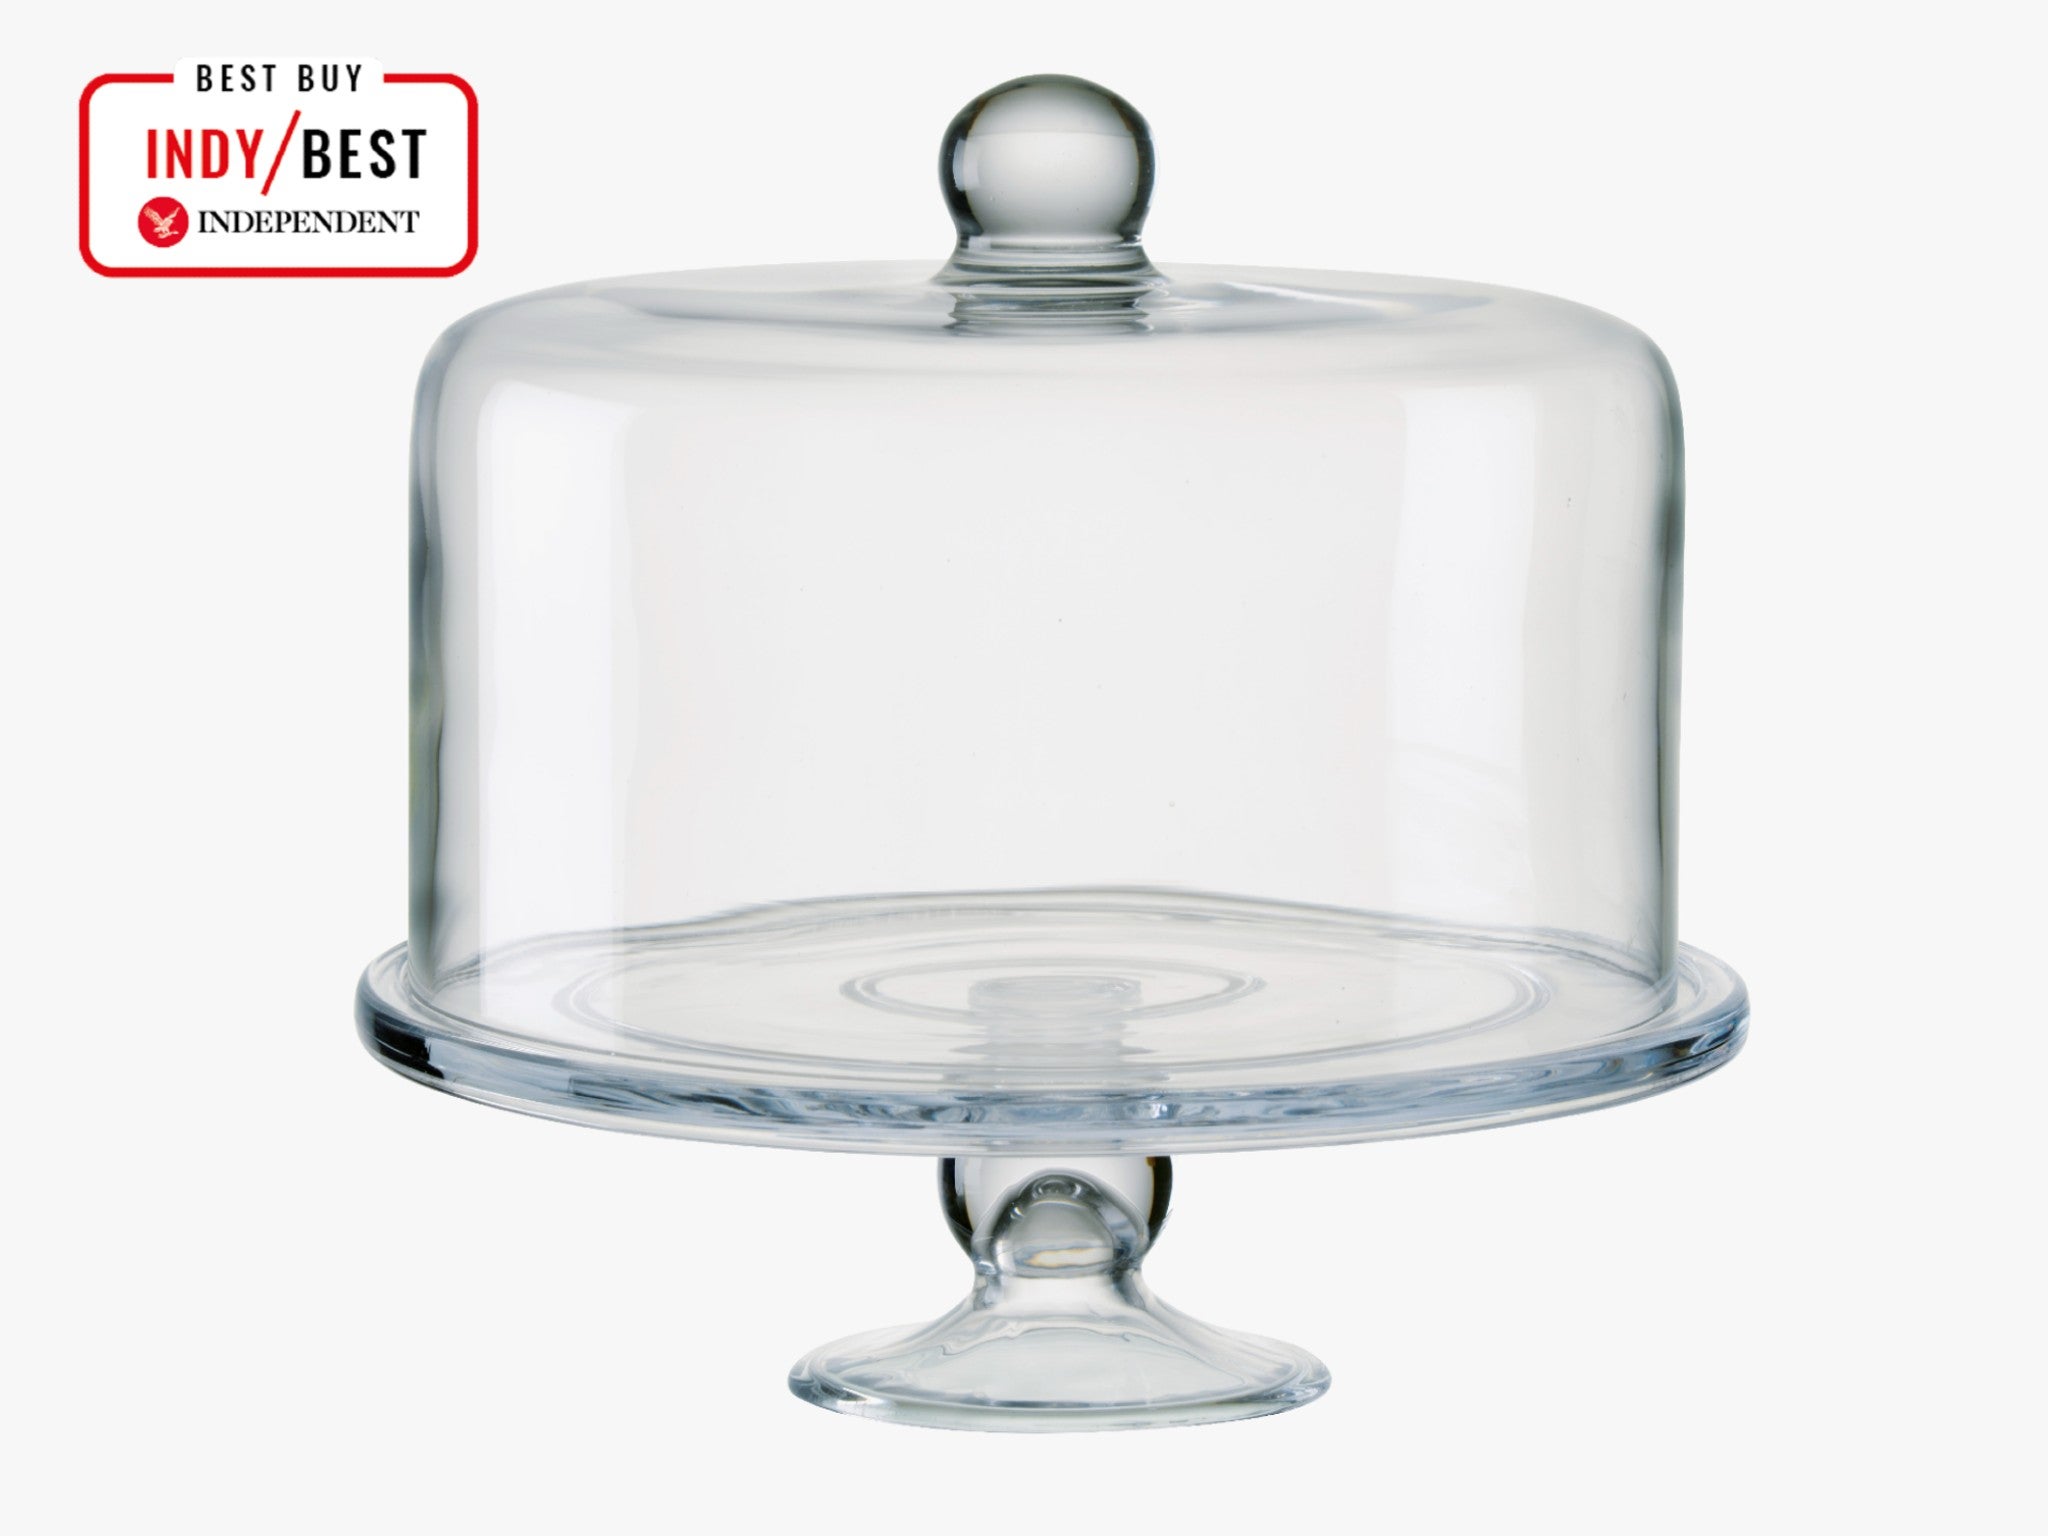 Artland simplicity cake stand with straight-sided dome indybest.jpeg